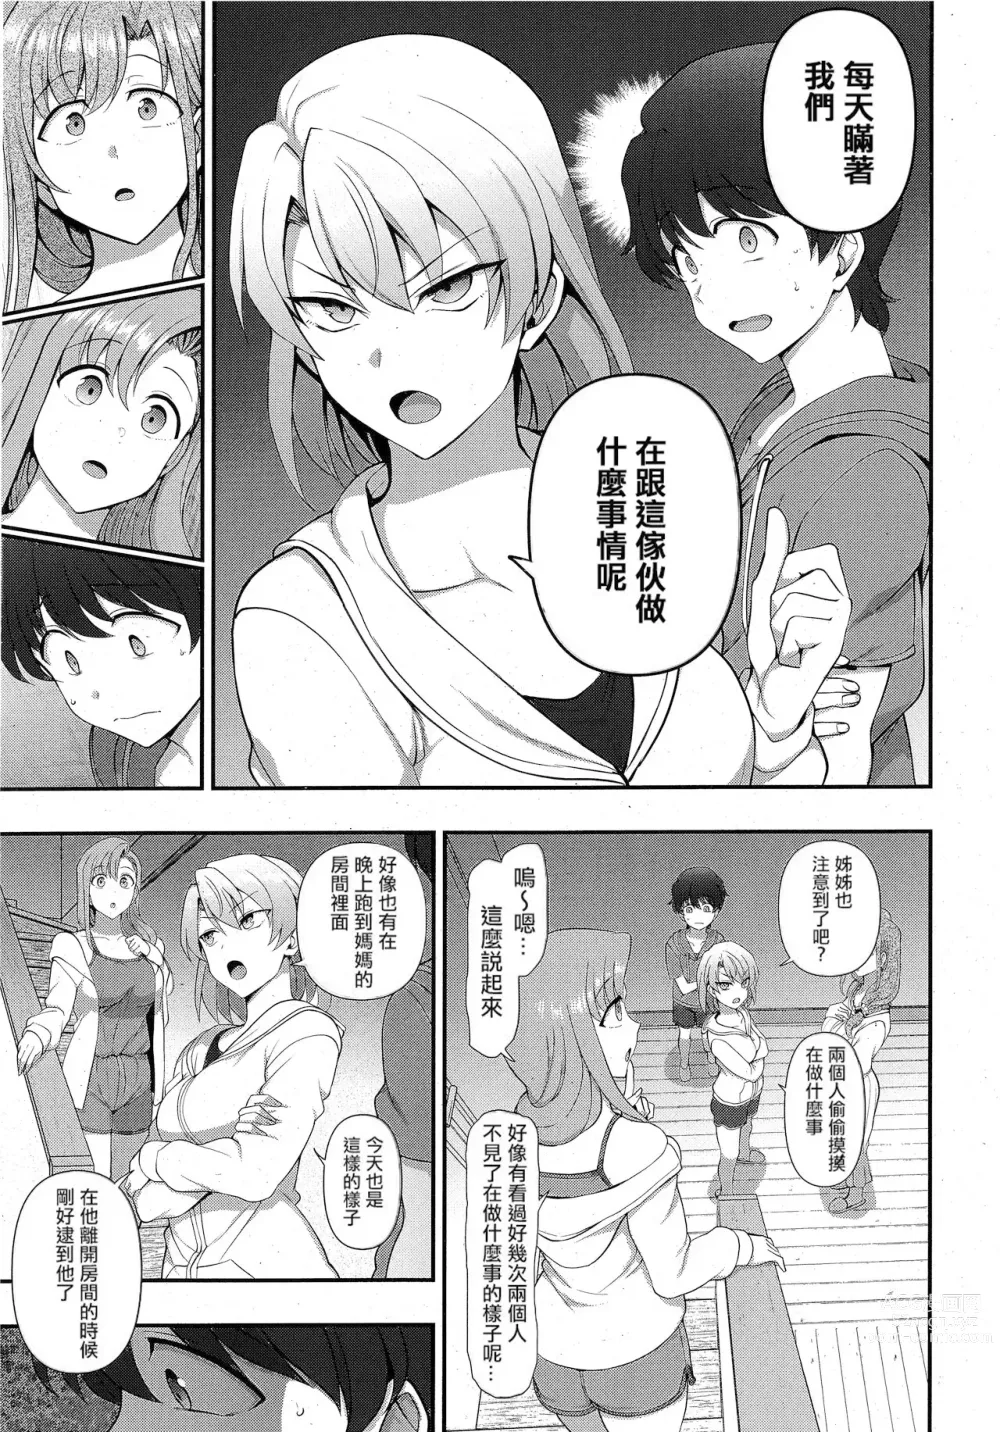 Page 3 of manga FamiCon - Family Control Ch. 3 (decensored)